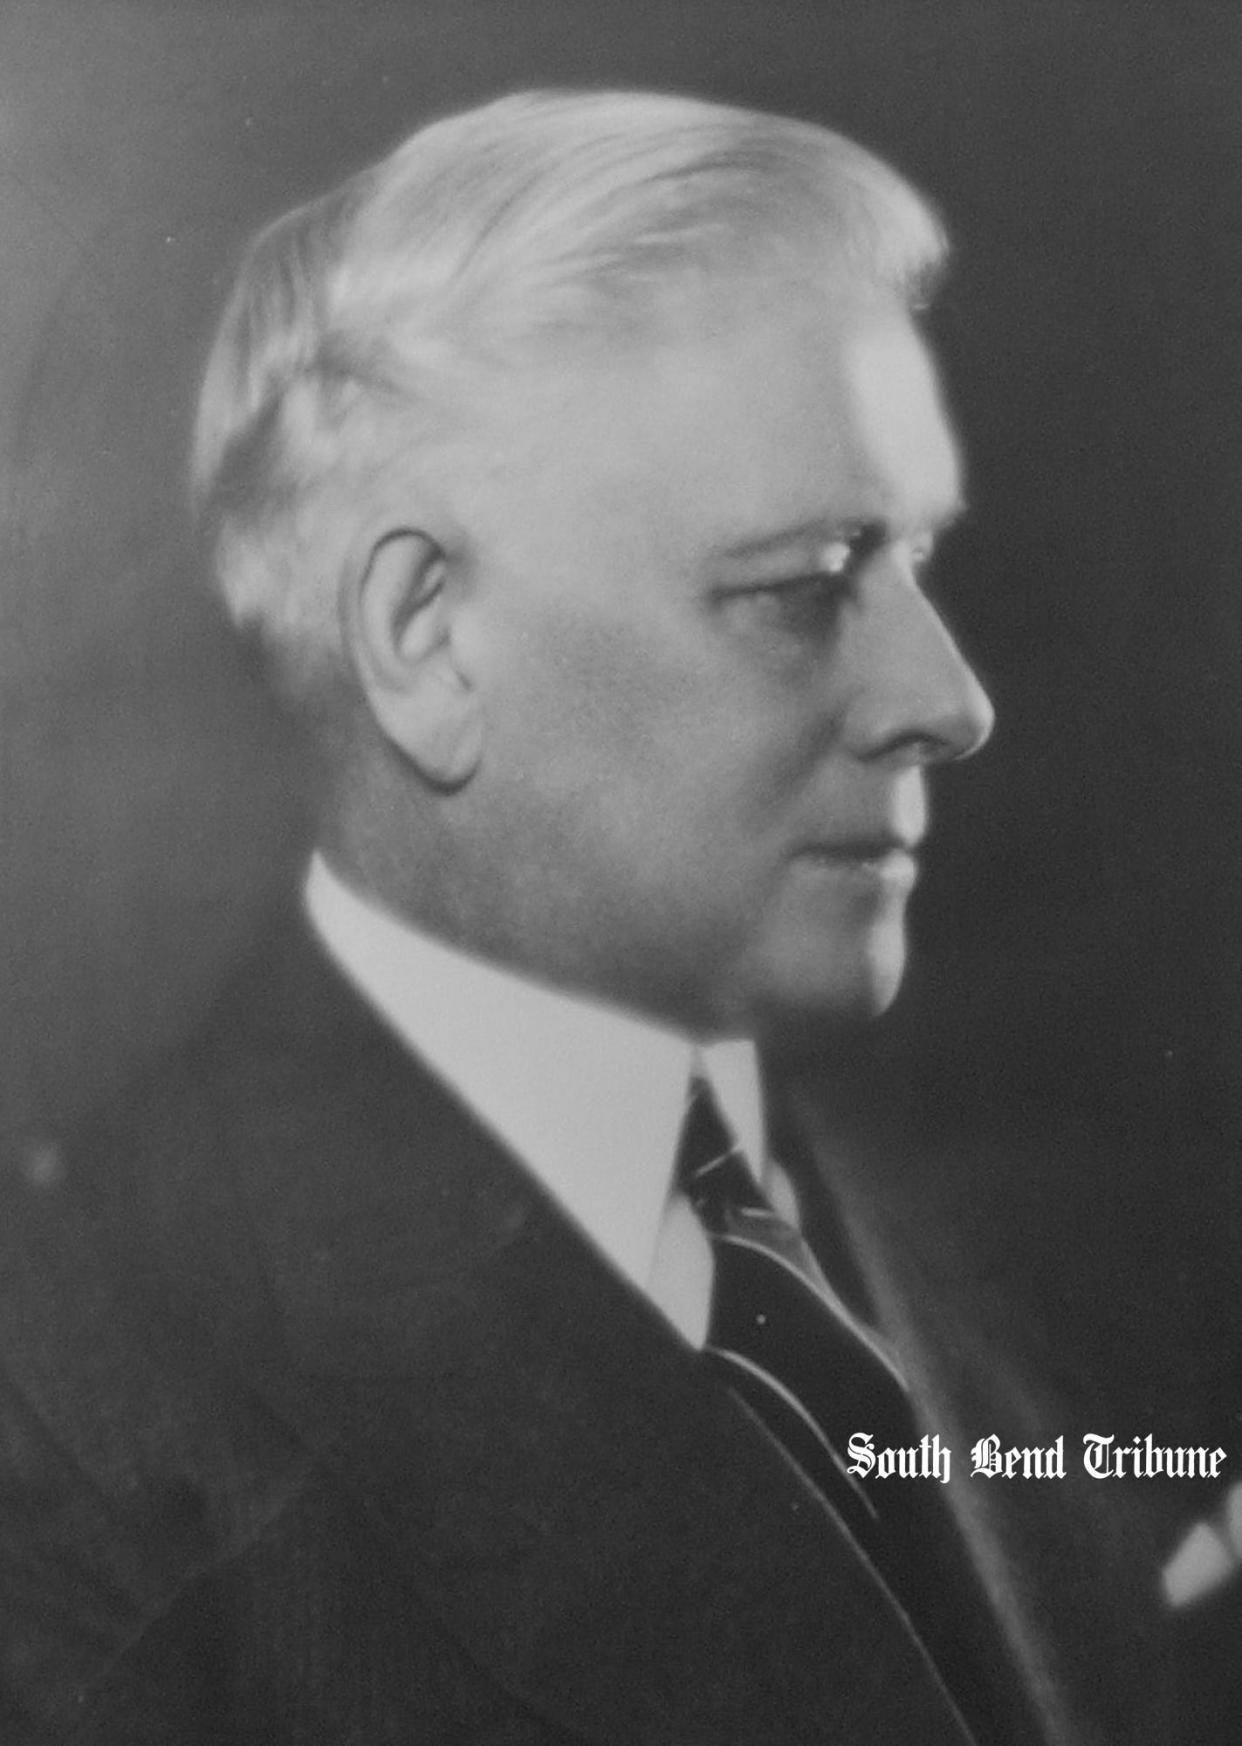 This portrait shows Frank E. Hering, the University of Notre Dame head football coach from 1896 to 1898. In 1924, Hering and his wife, Claribel, bought a former church on Division Street (later Western Avenue) and donated it for use as a Black cultural center. Known as Hering House, it served the community from 1925 to 1963.